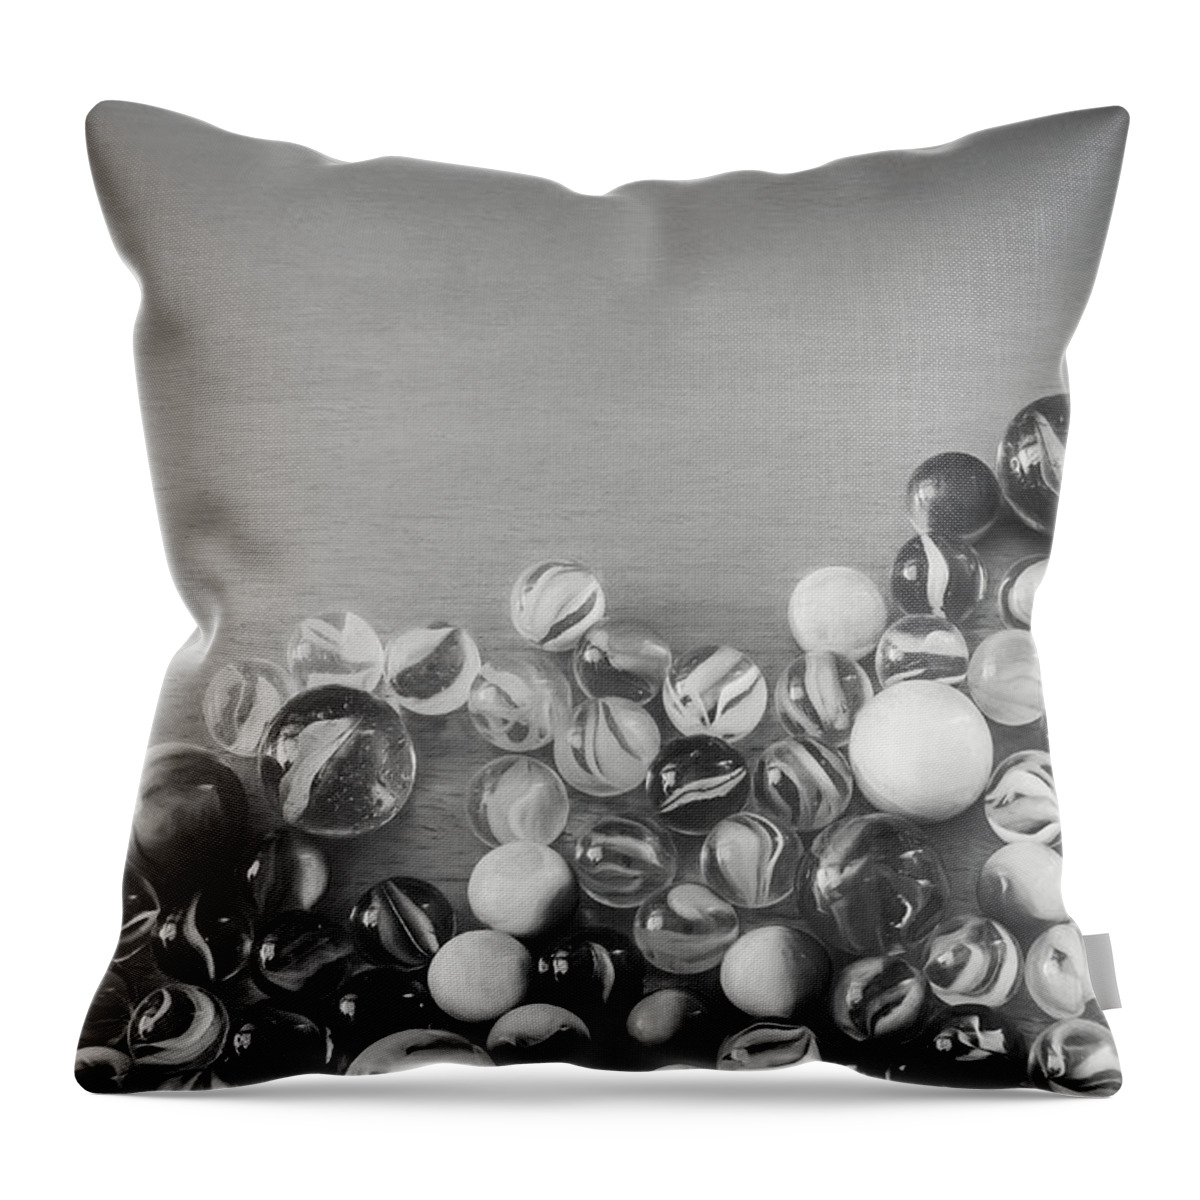 Black And White Throw Pillow featuring the photograph Half My Marbles by Scott Norris